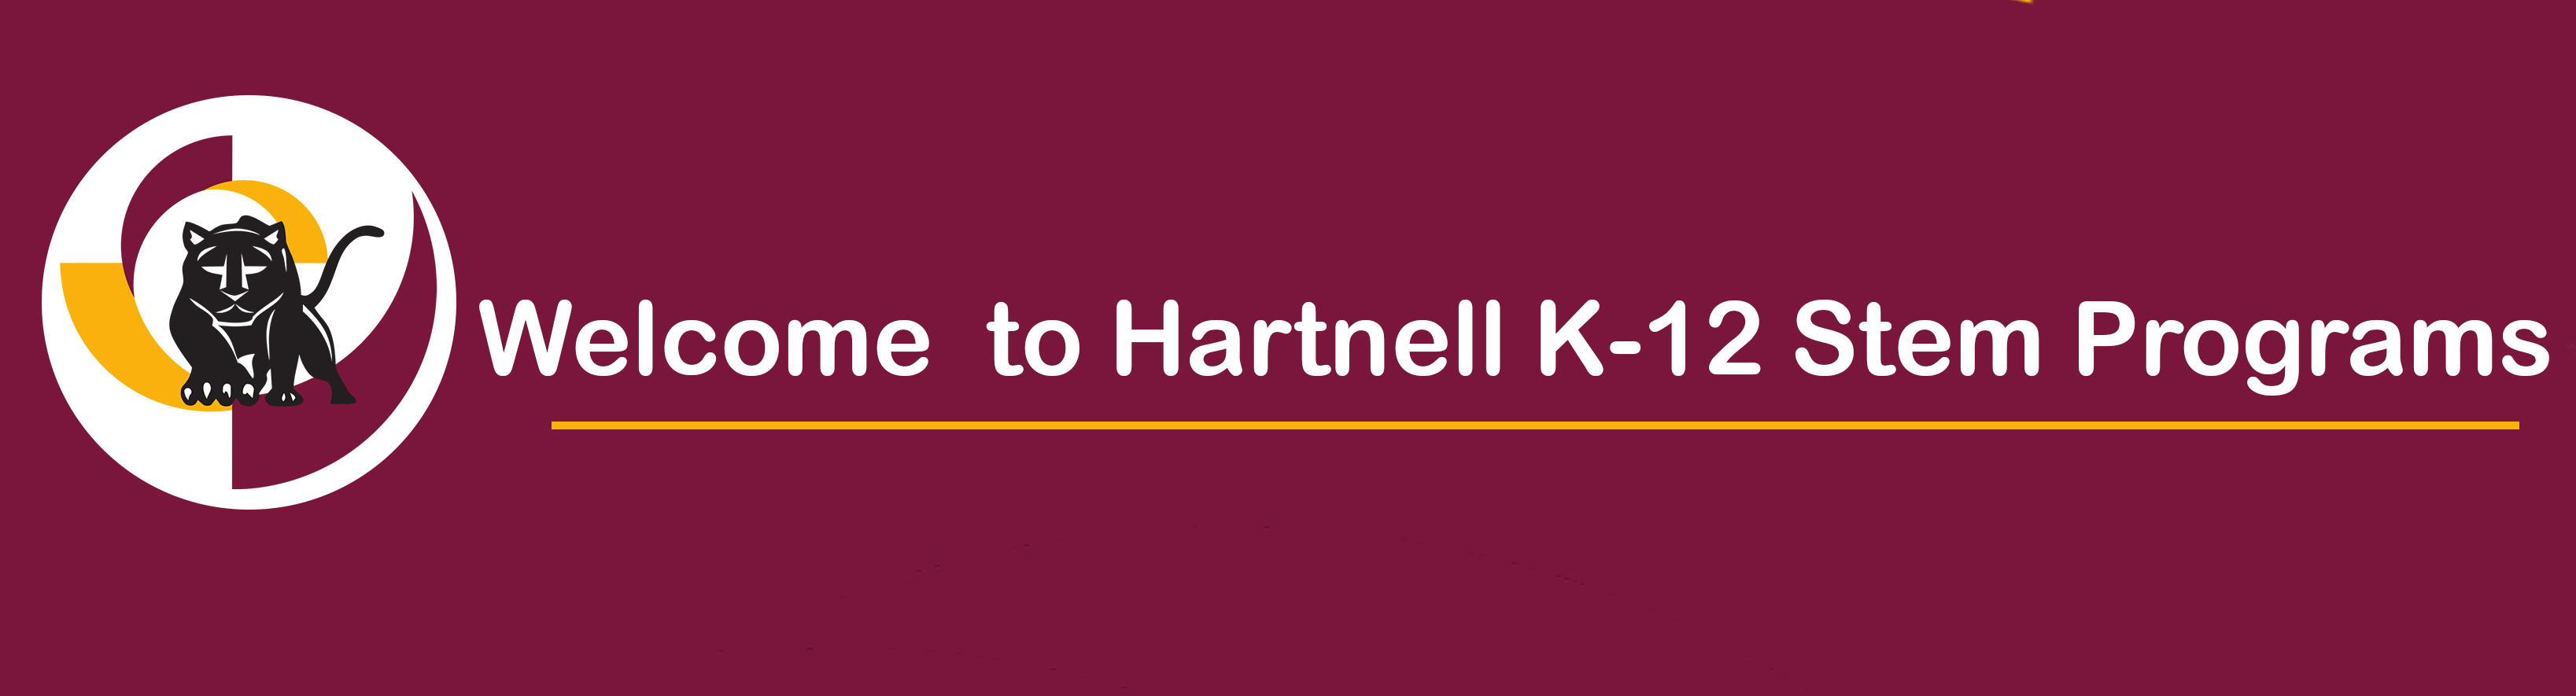 welcome to hartnell k12 stem programs image